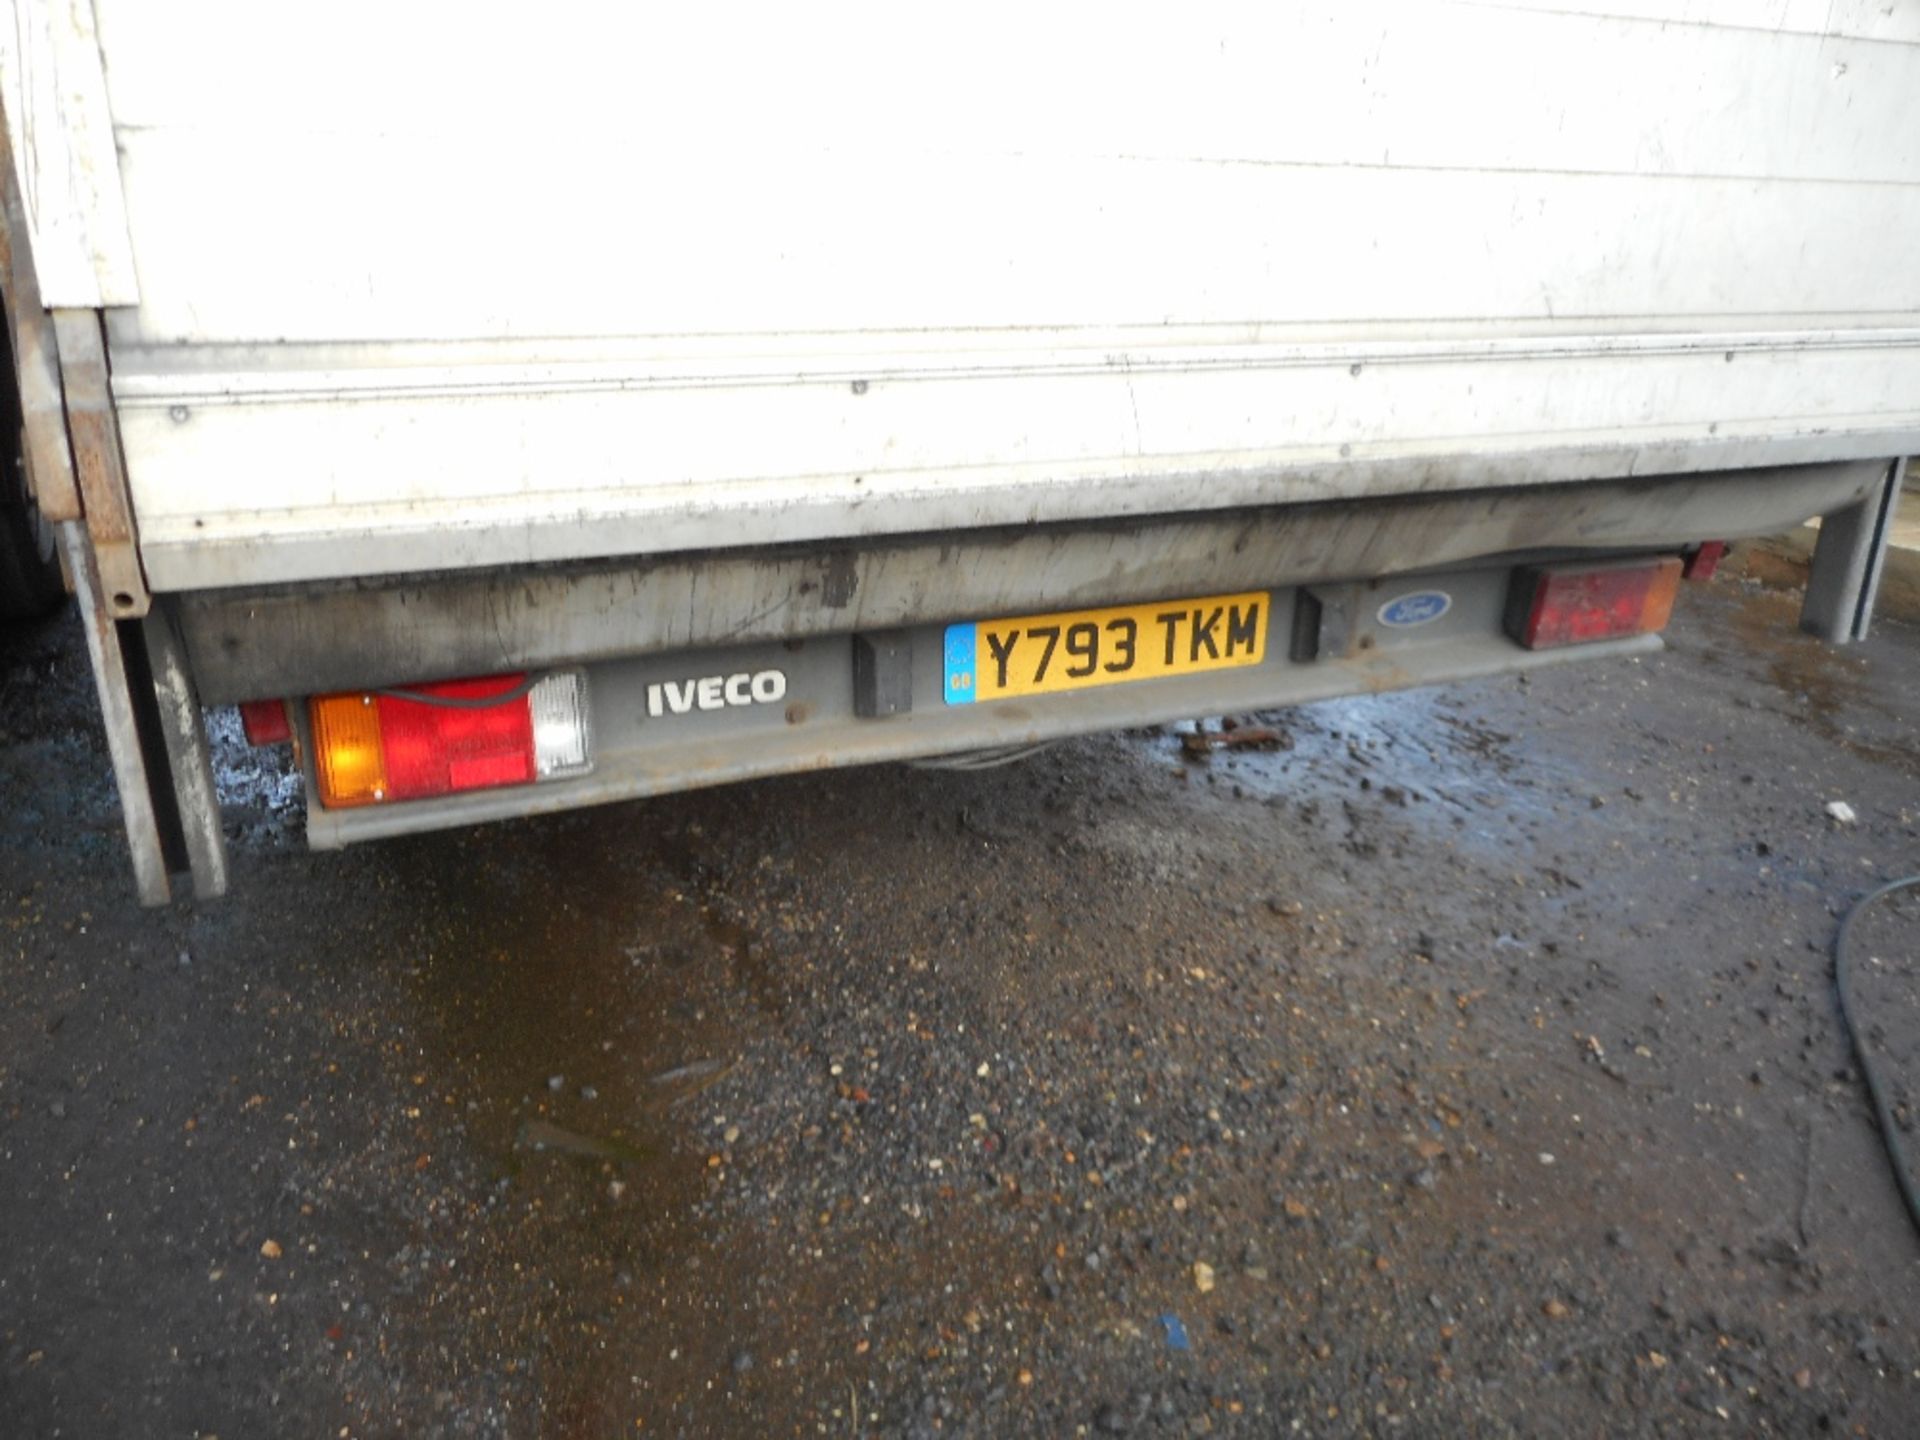 Ford Tector 7500kg rated lorry with box/curtainsided body day cab tail lift fitted reg: Y793 TKM - Image 6 of 8